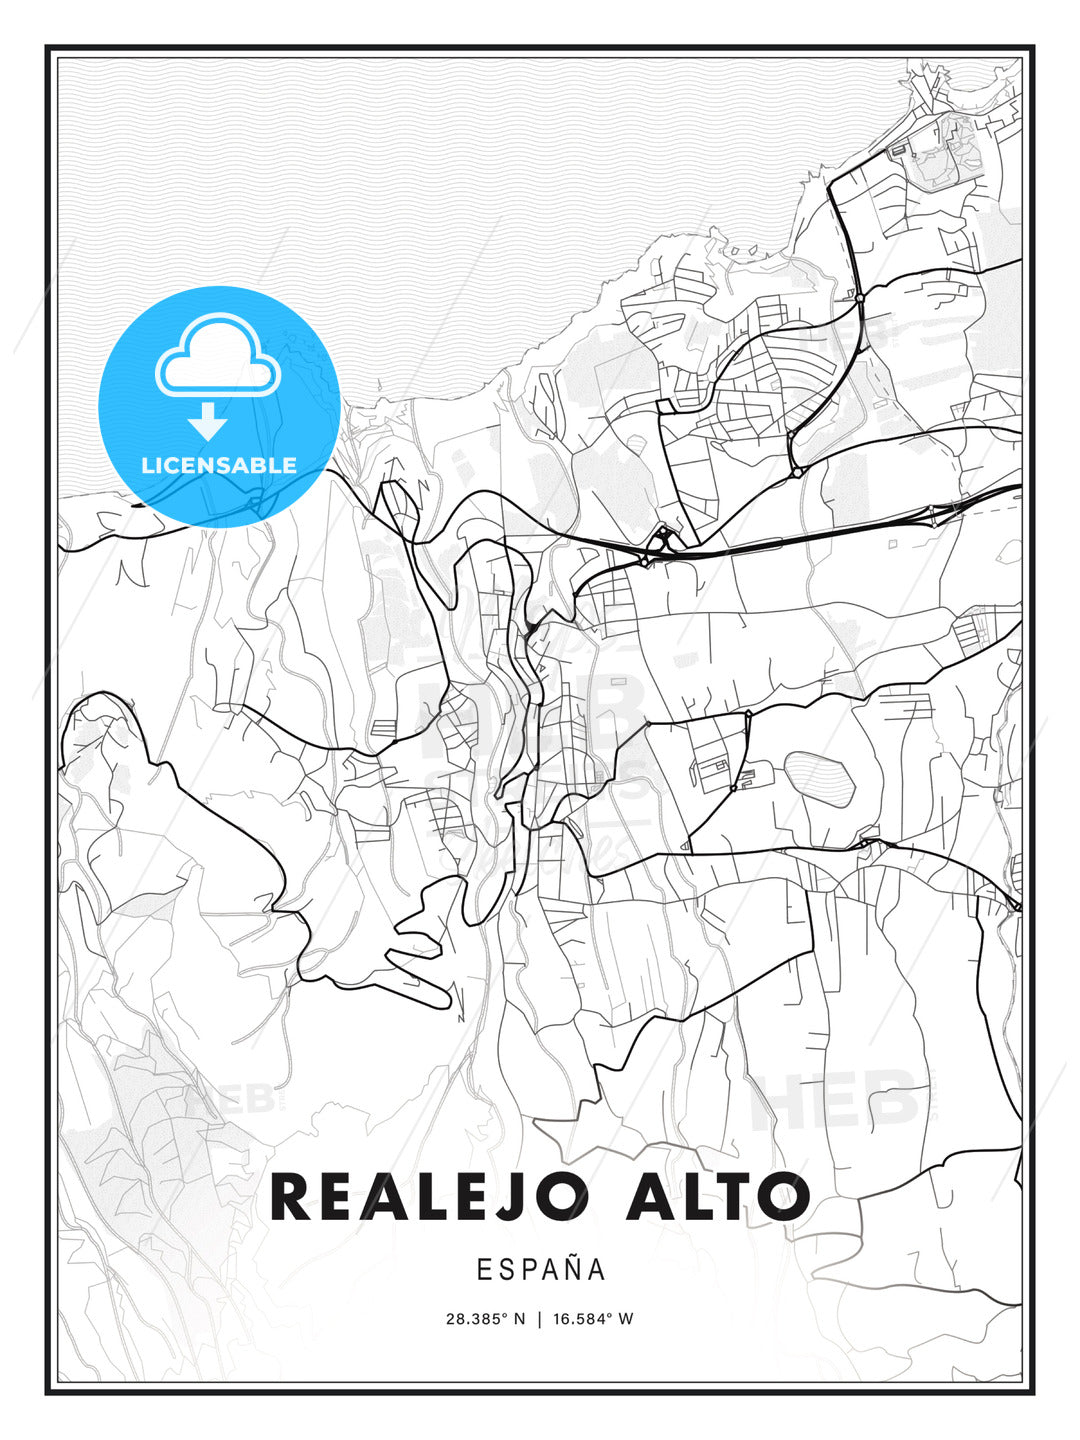 Realejo Alto, Spain, Modern Print Template in Various Formats - HEBSTREITS Sketches